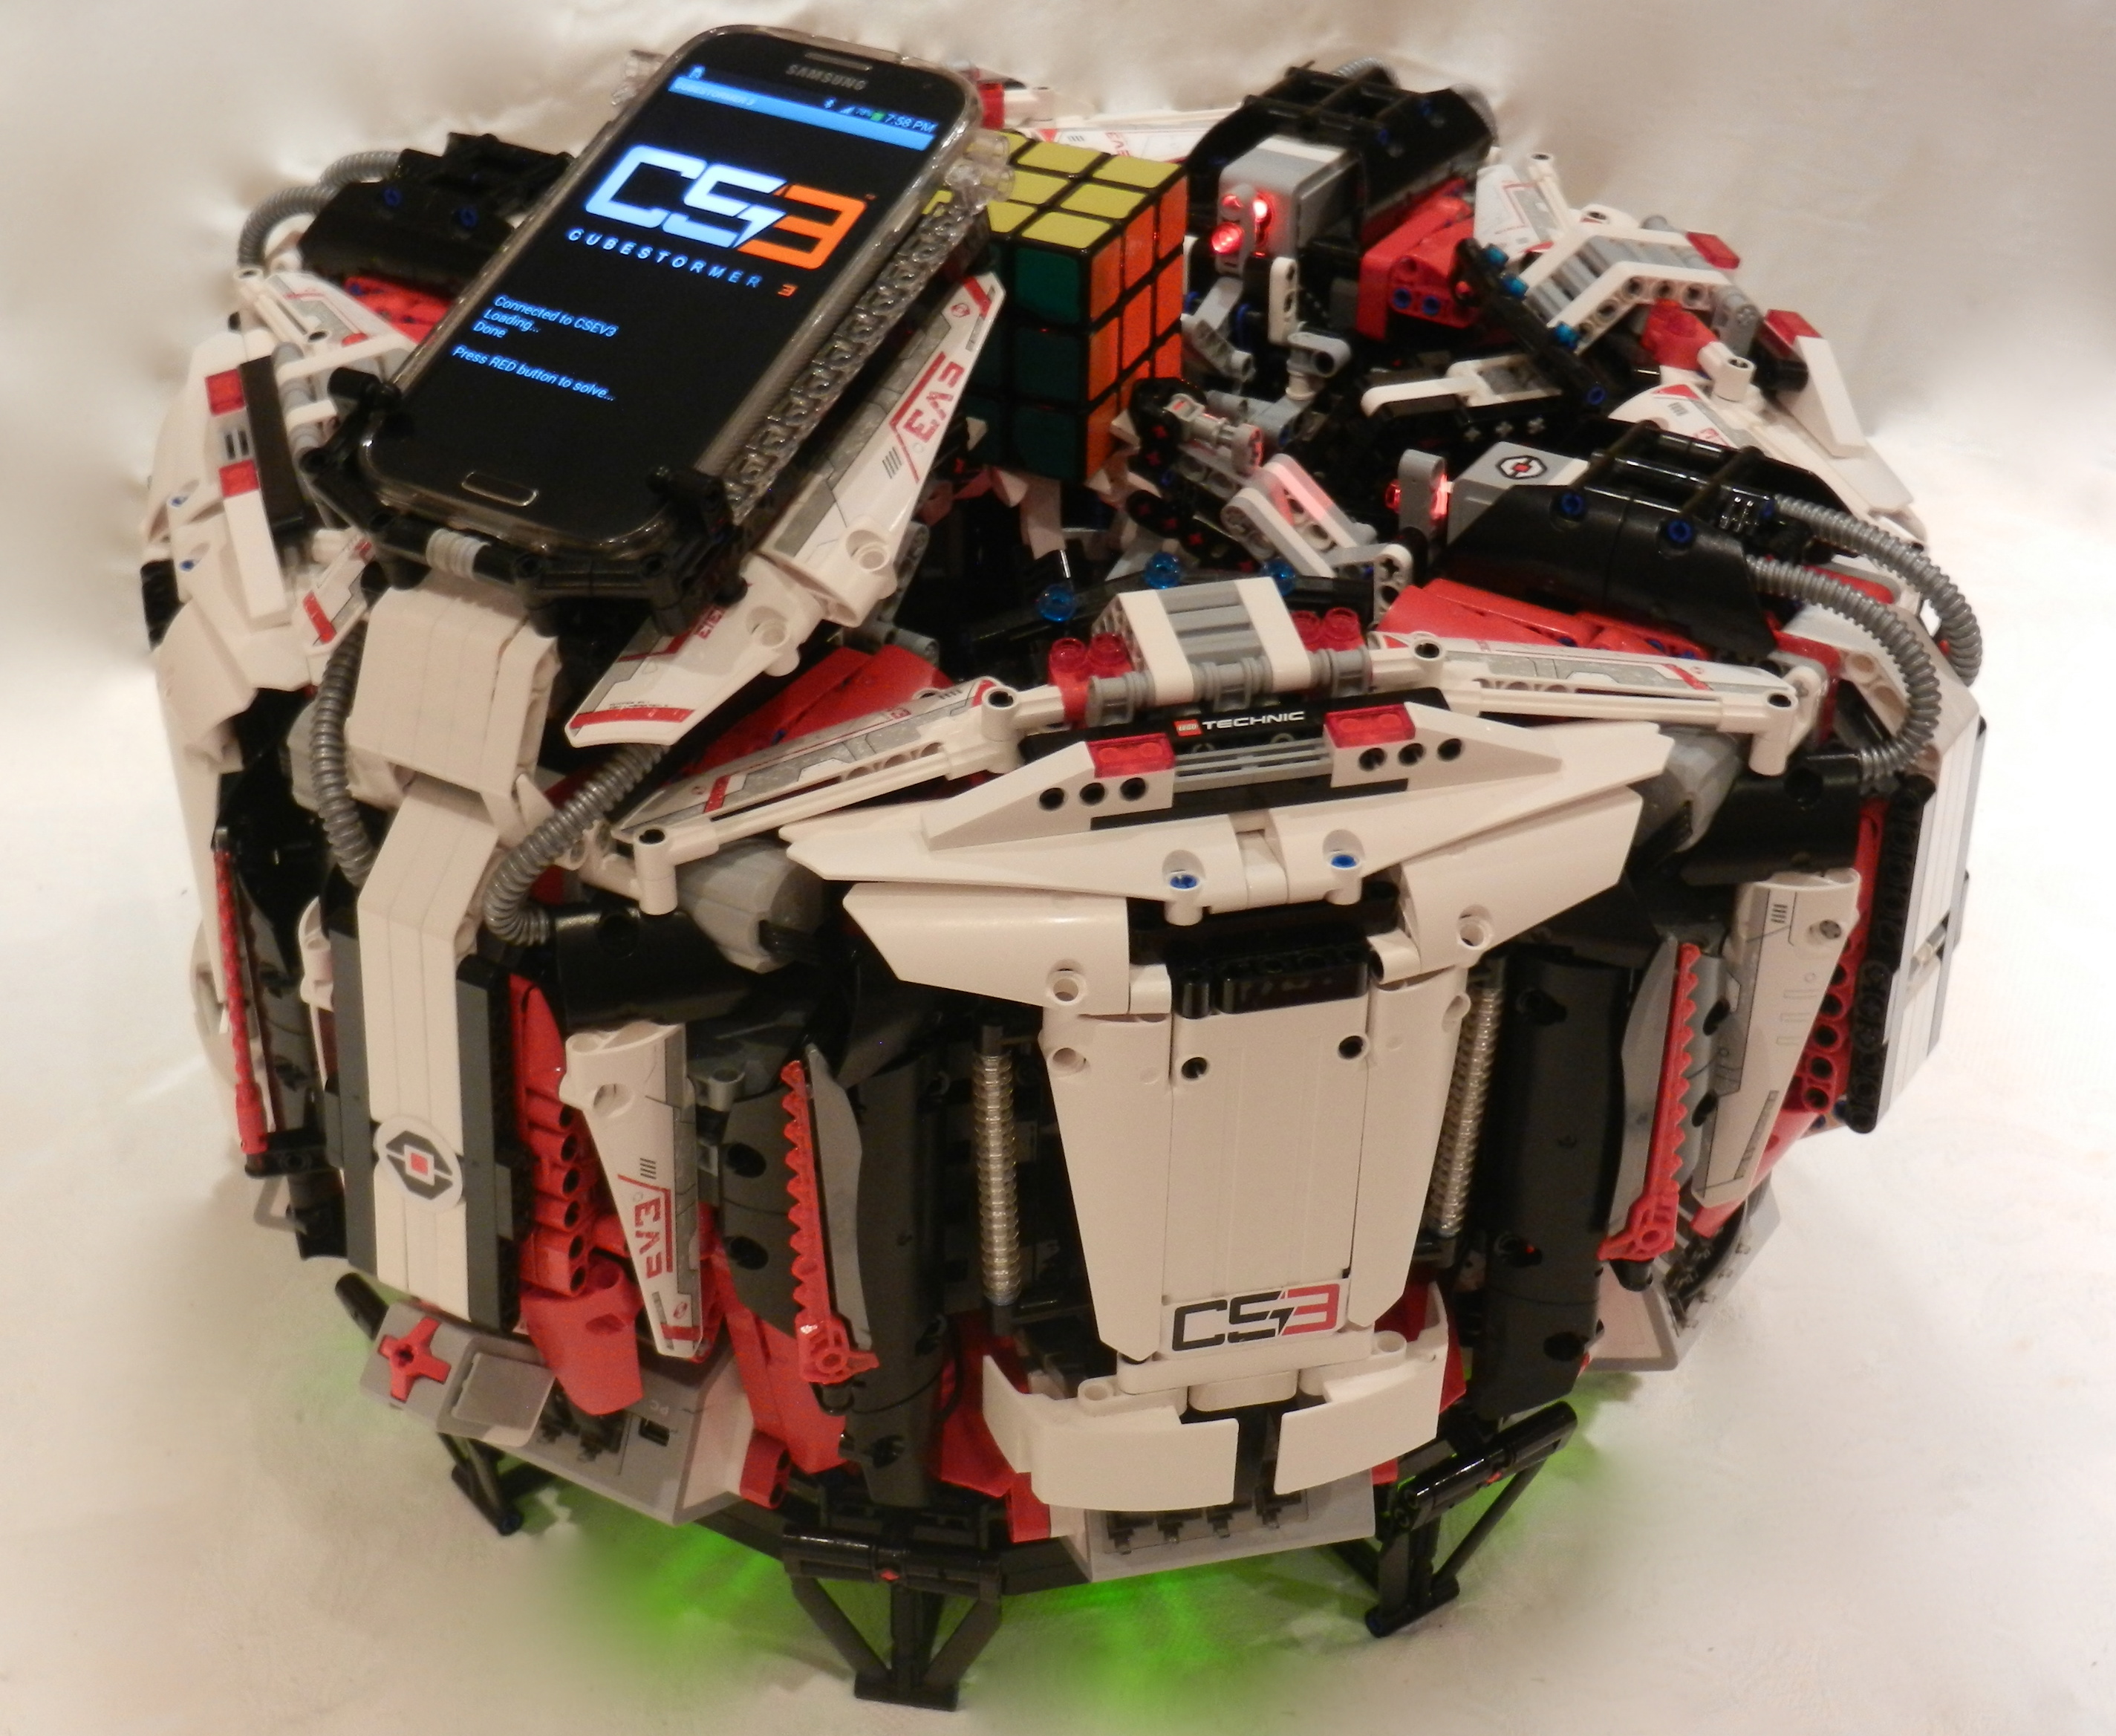 LEGO Robot Solves Rubik’s Cube in World Record Time